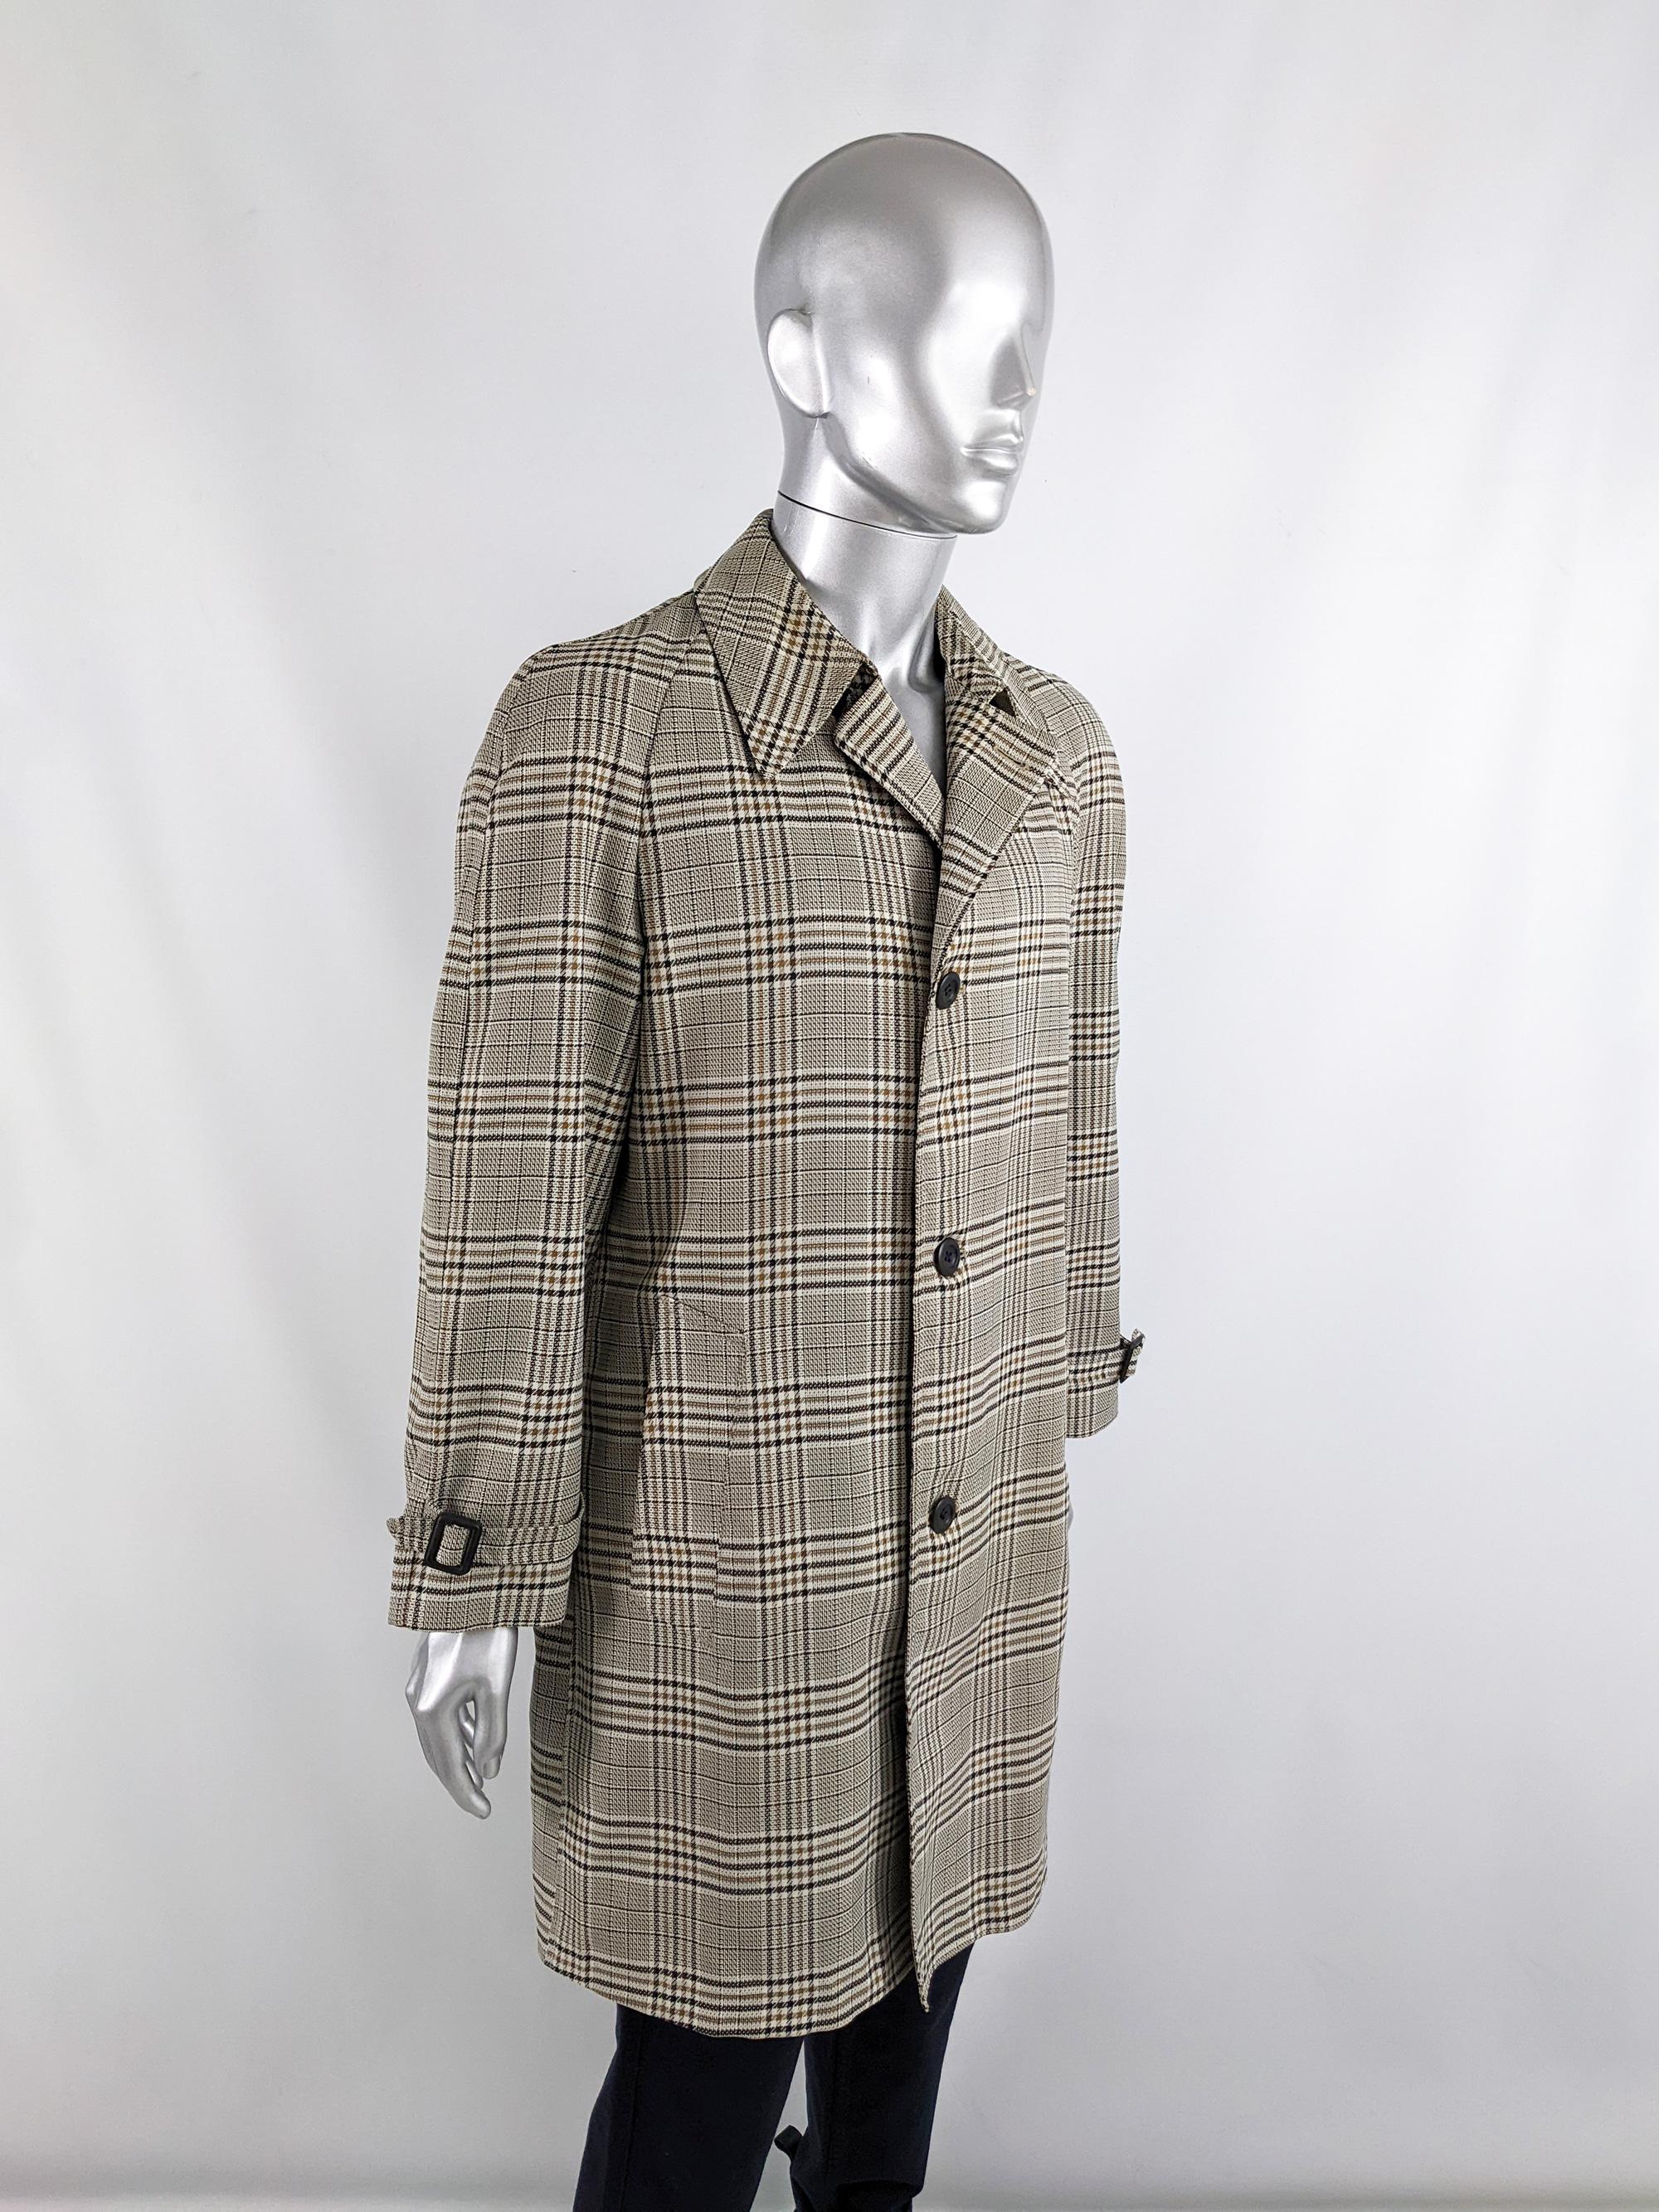 Vintage 1960s Mens Vintage Mod London Fog Checked Overcoat Coat In Excellent Condition For Sale In Doncaster, South Yorkshire